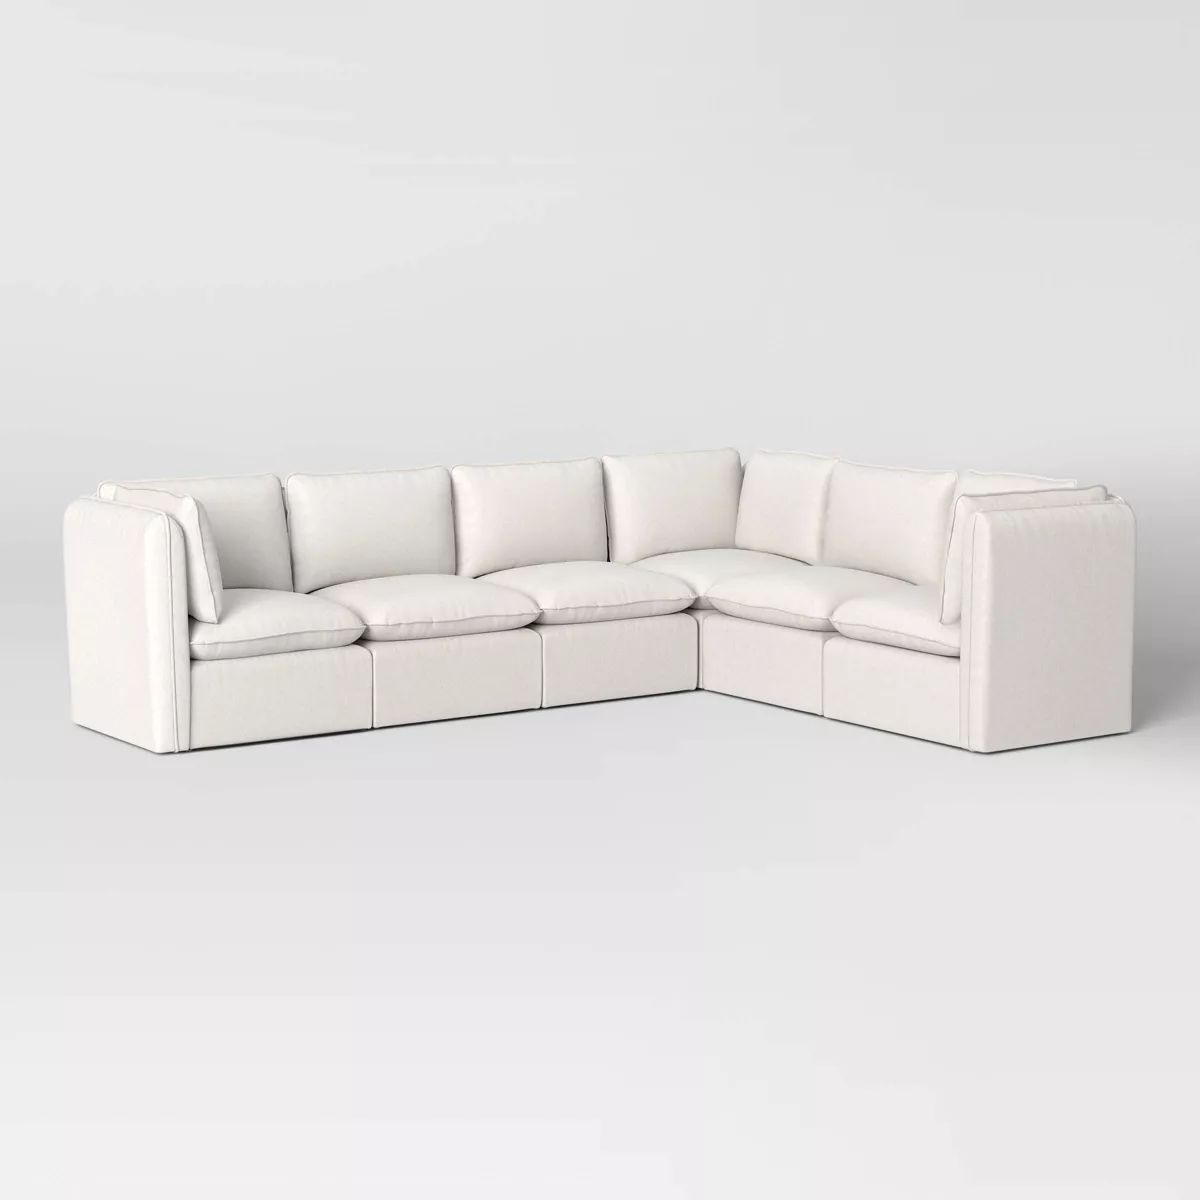 6pc Haven French Seam Modular Sectional - Threshold™ | Target